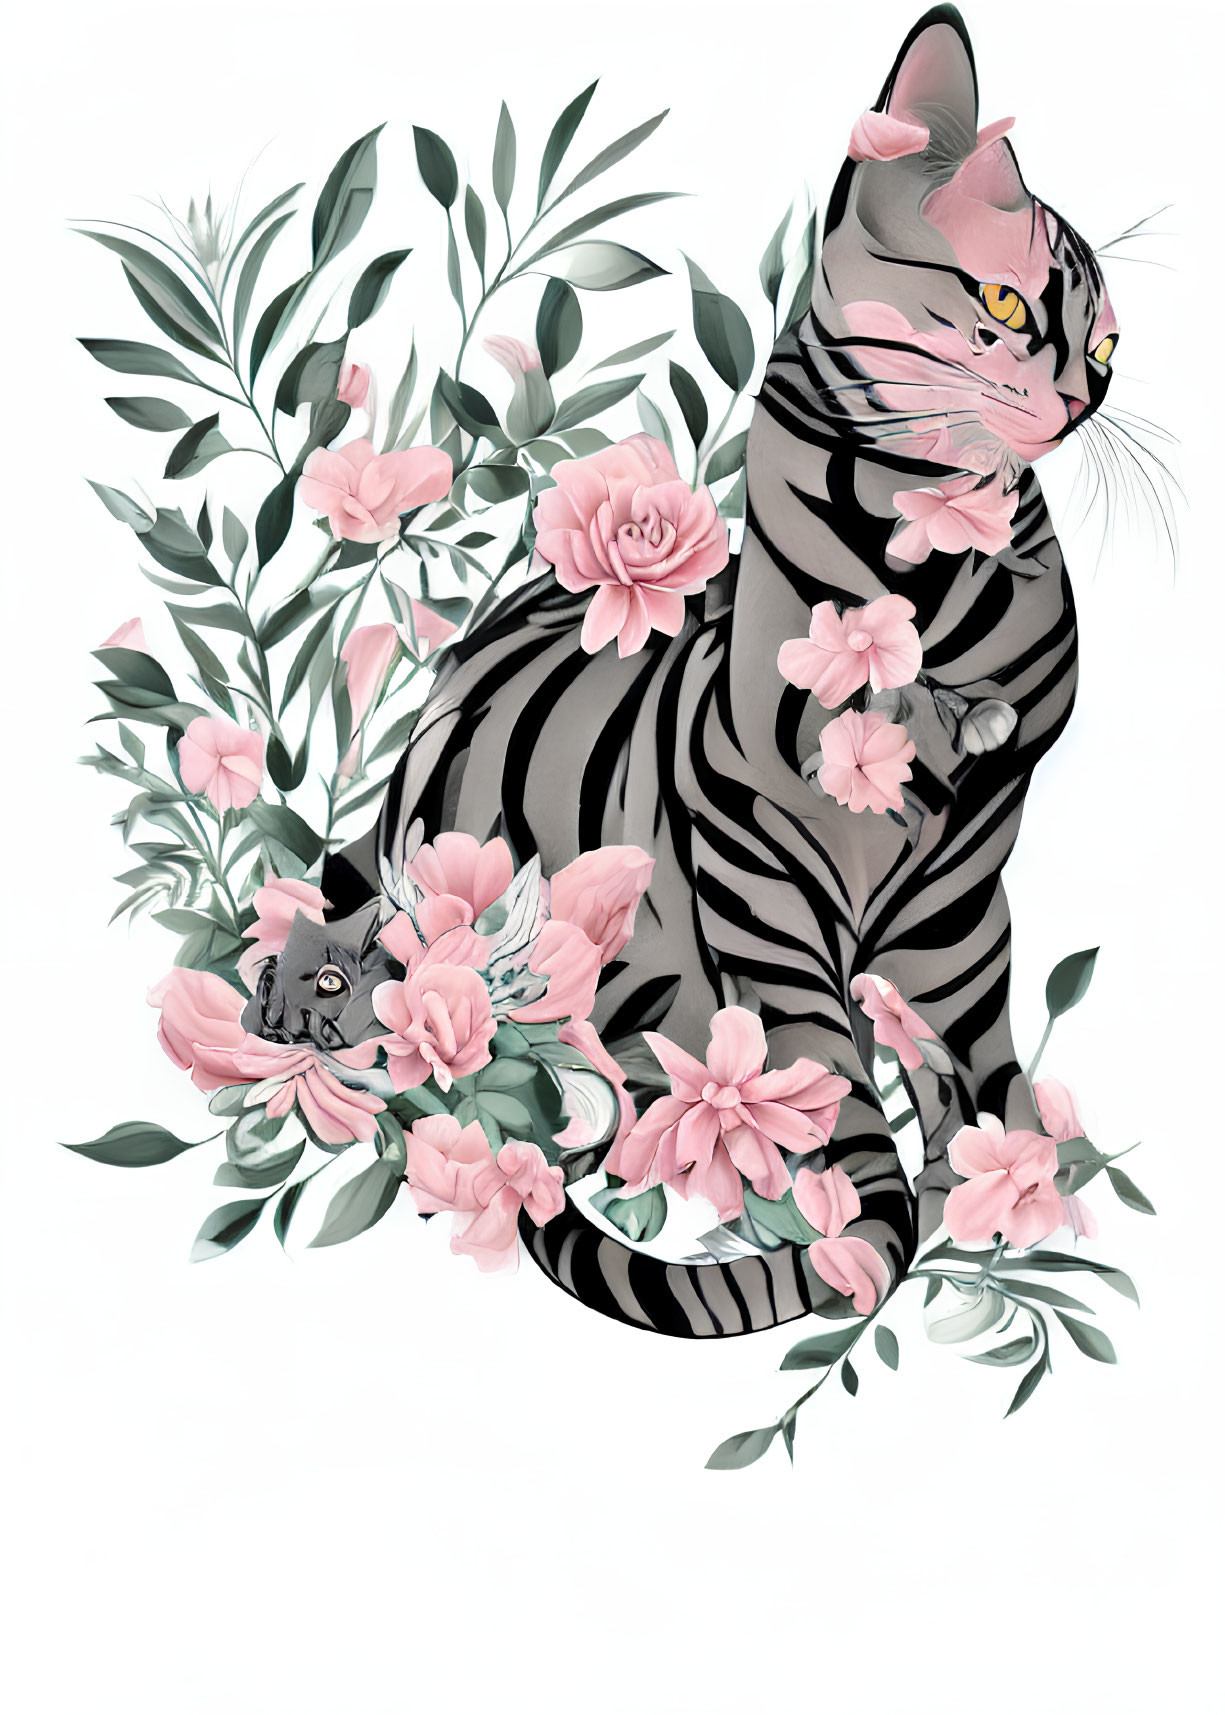 Large Striped Cat Surrounded by Green Foliage and Pink Flowers, Grey Kitten Peeking